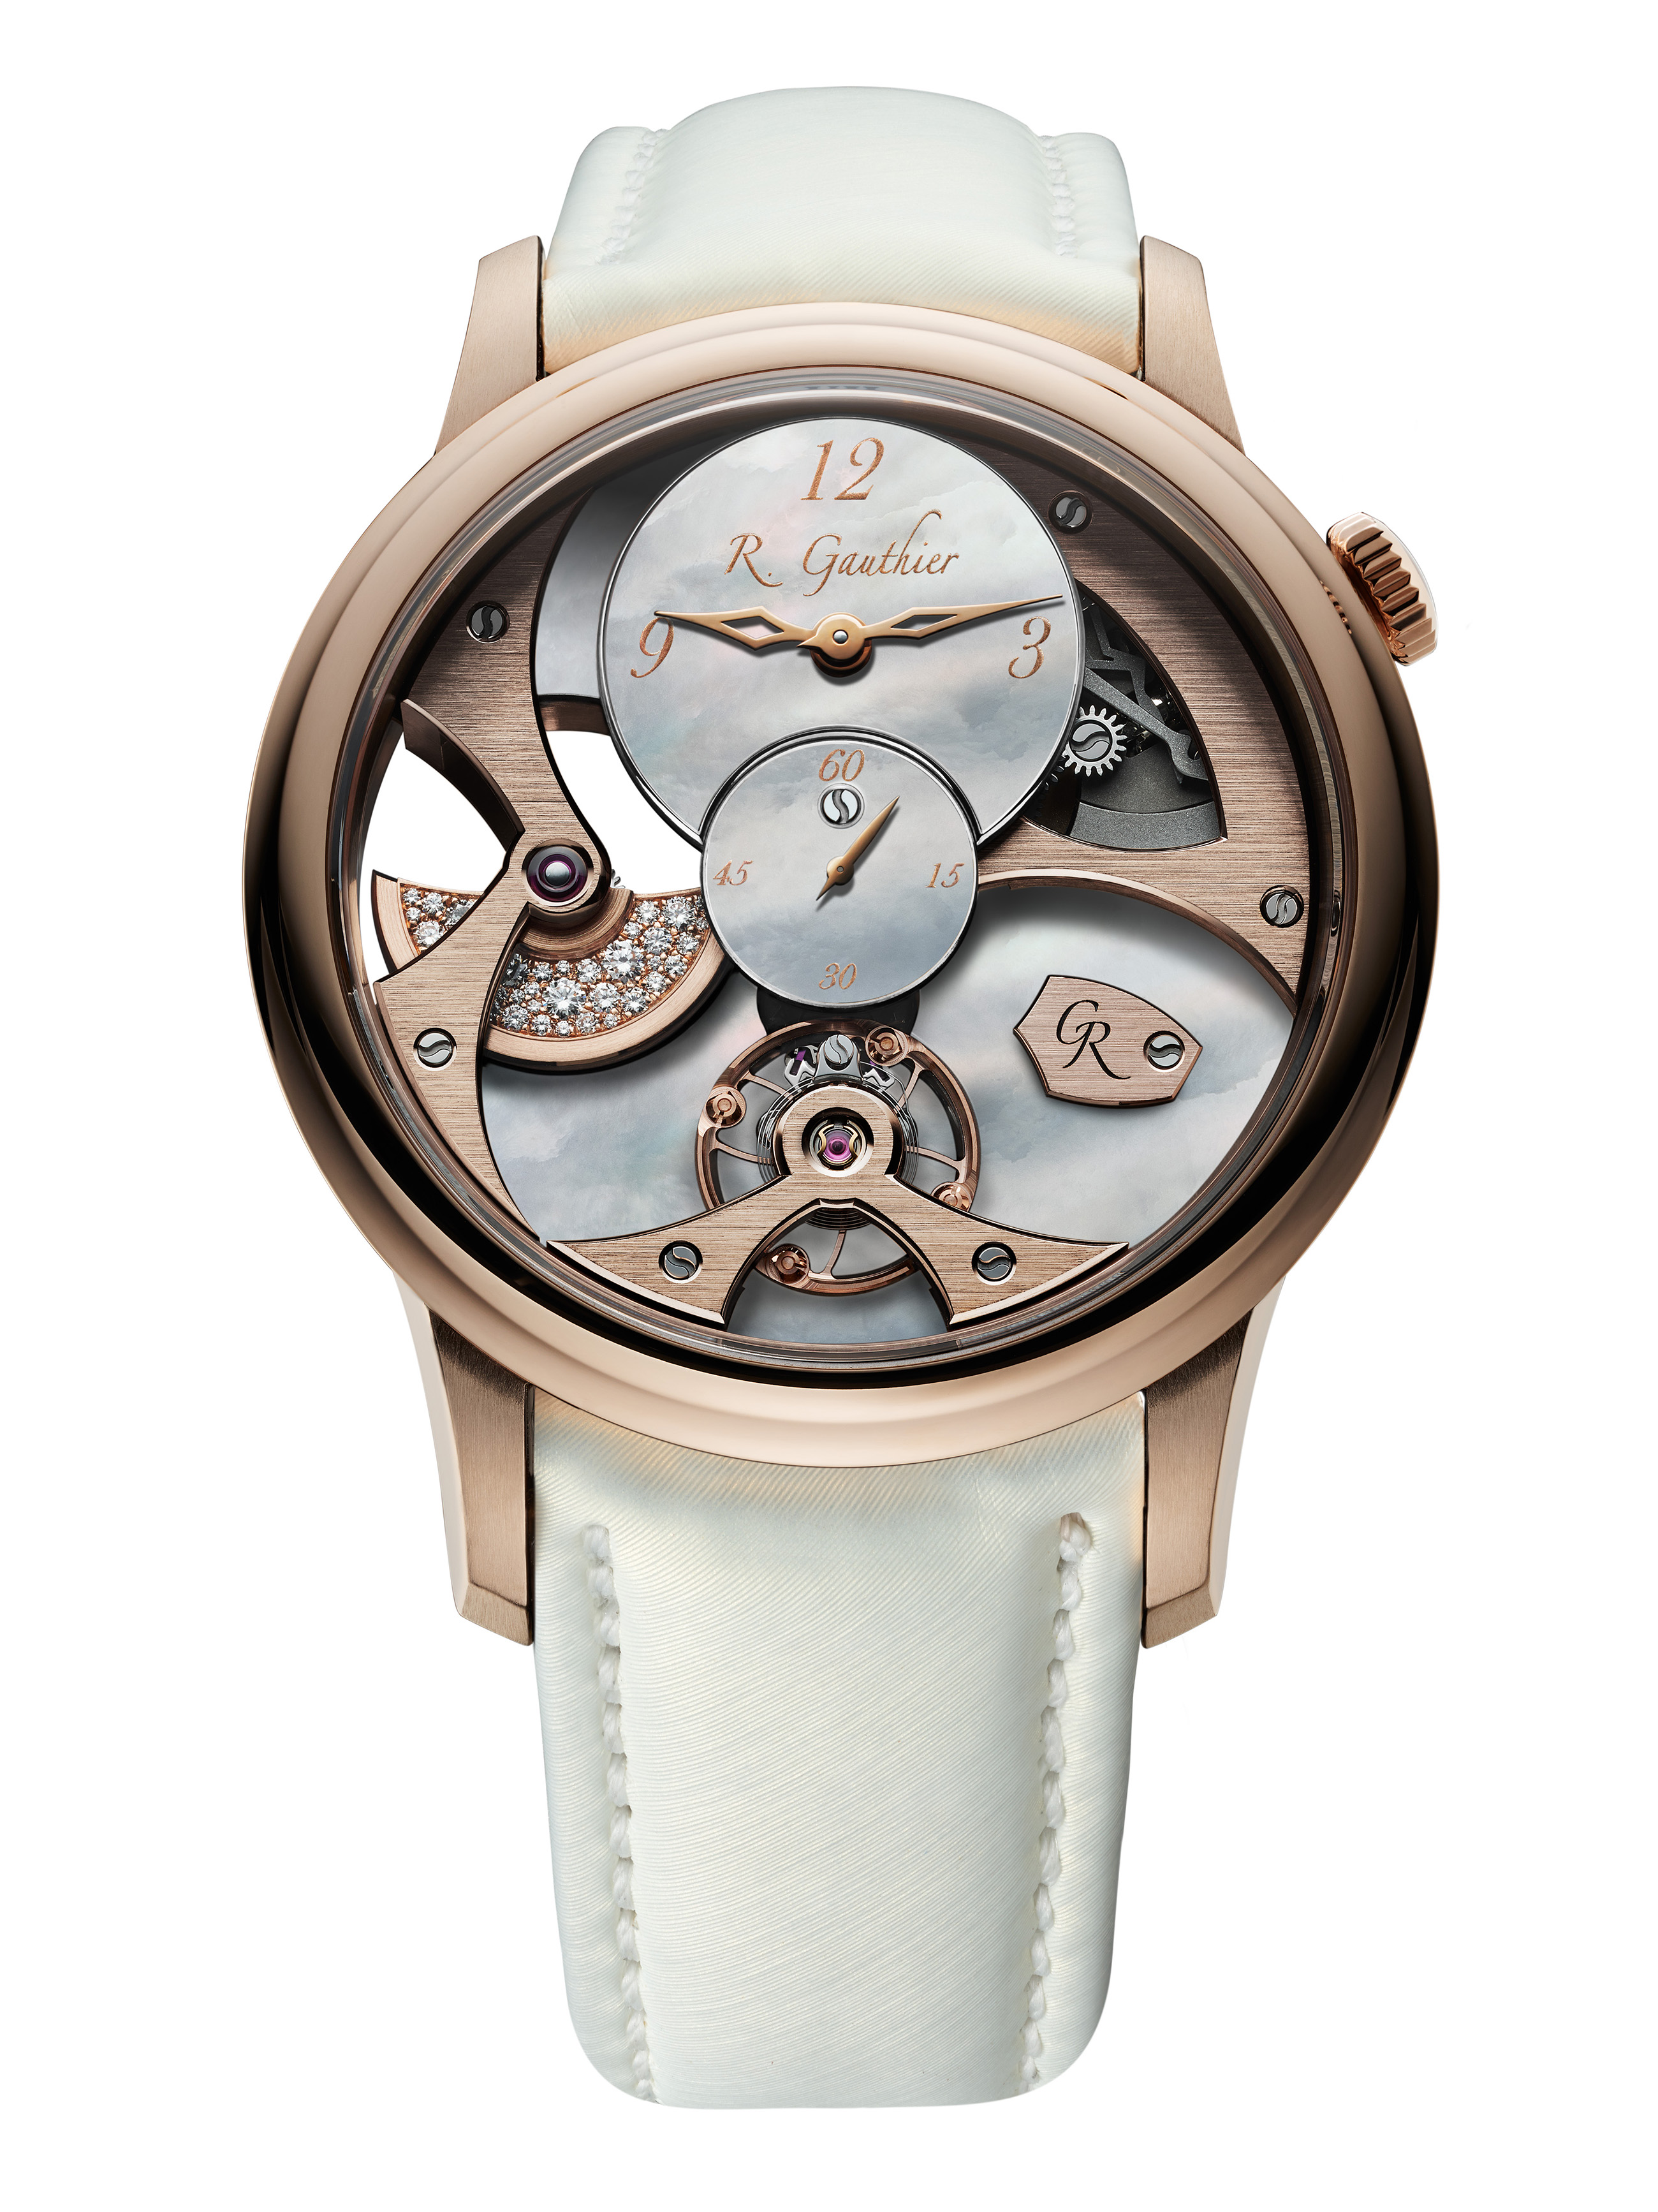 Romain_Gauthier_Insight_Micro-Rotor_Lady_7_red_gold_white_dial copy